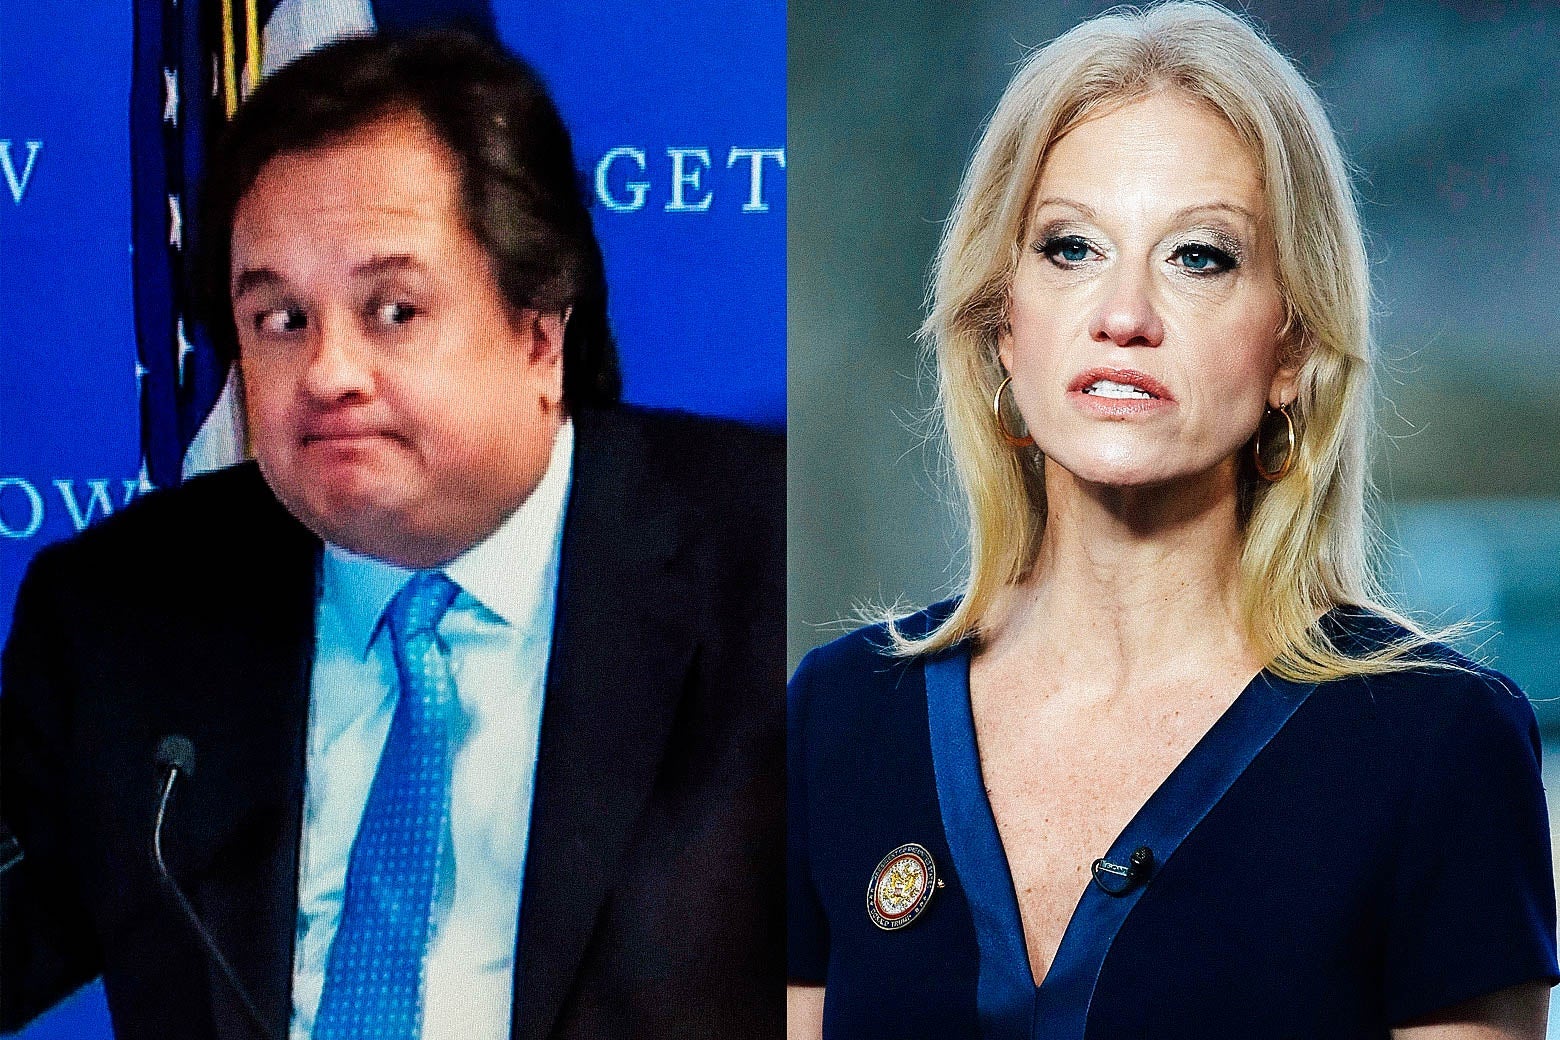 George Conway, making a sort of "not guilty," expression and Kellyanne Conway speaking.